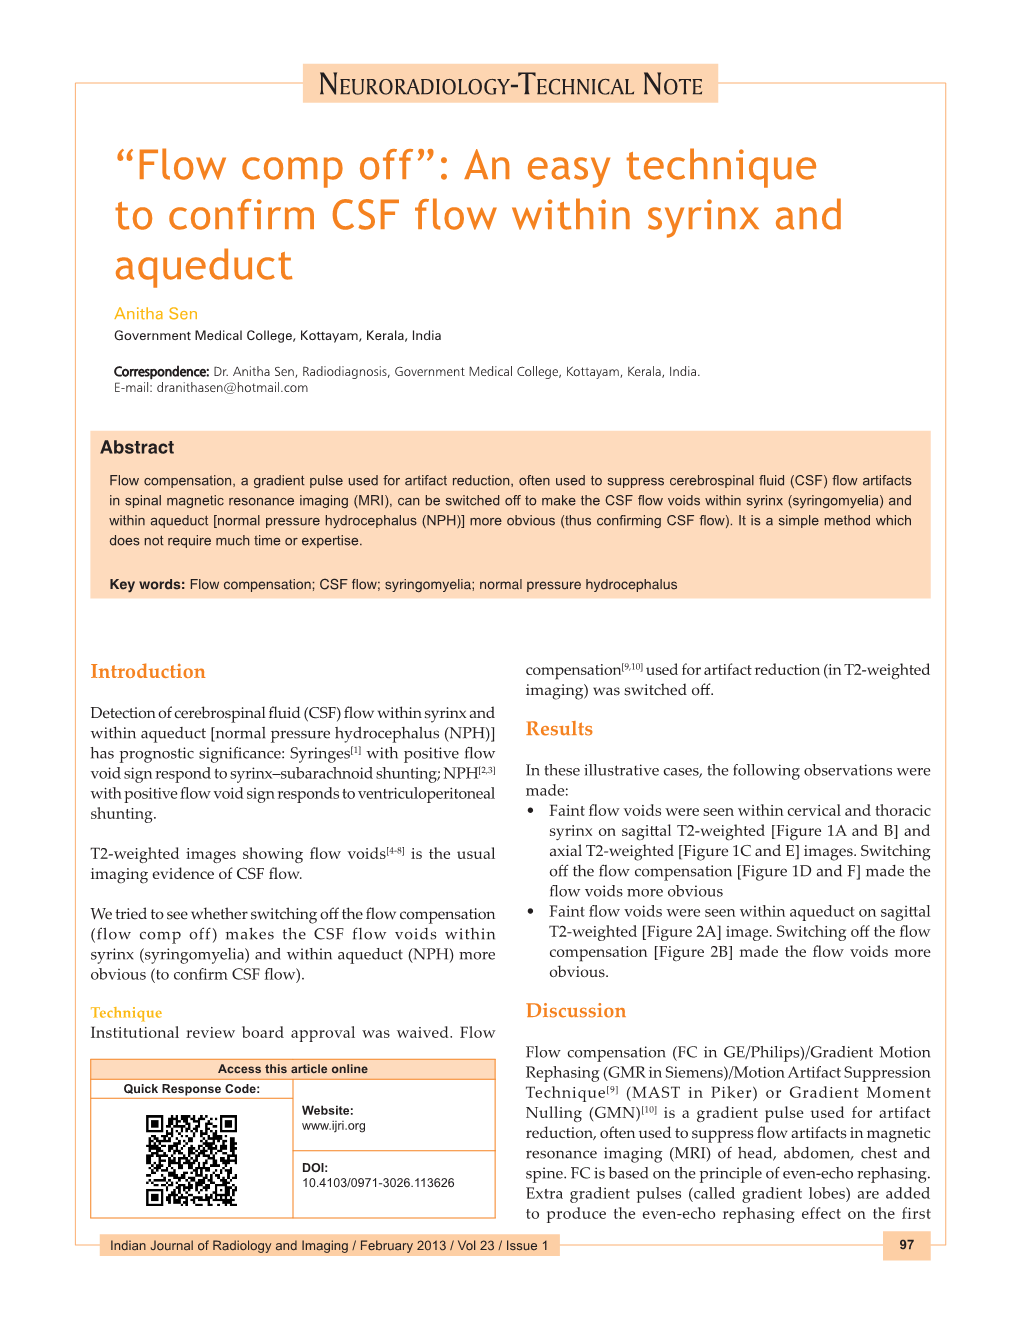 An Easy Technique to Confirm CSF Flow Within Syrinx and Aqueduct Anitha Sen Government Medical College, Kottayam, Kerala, India